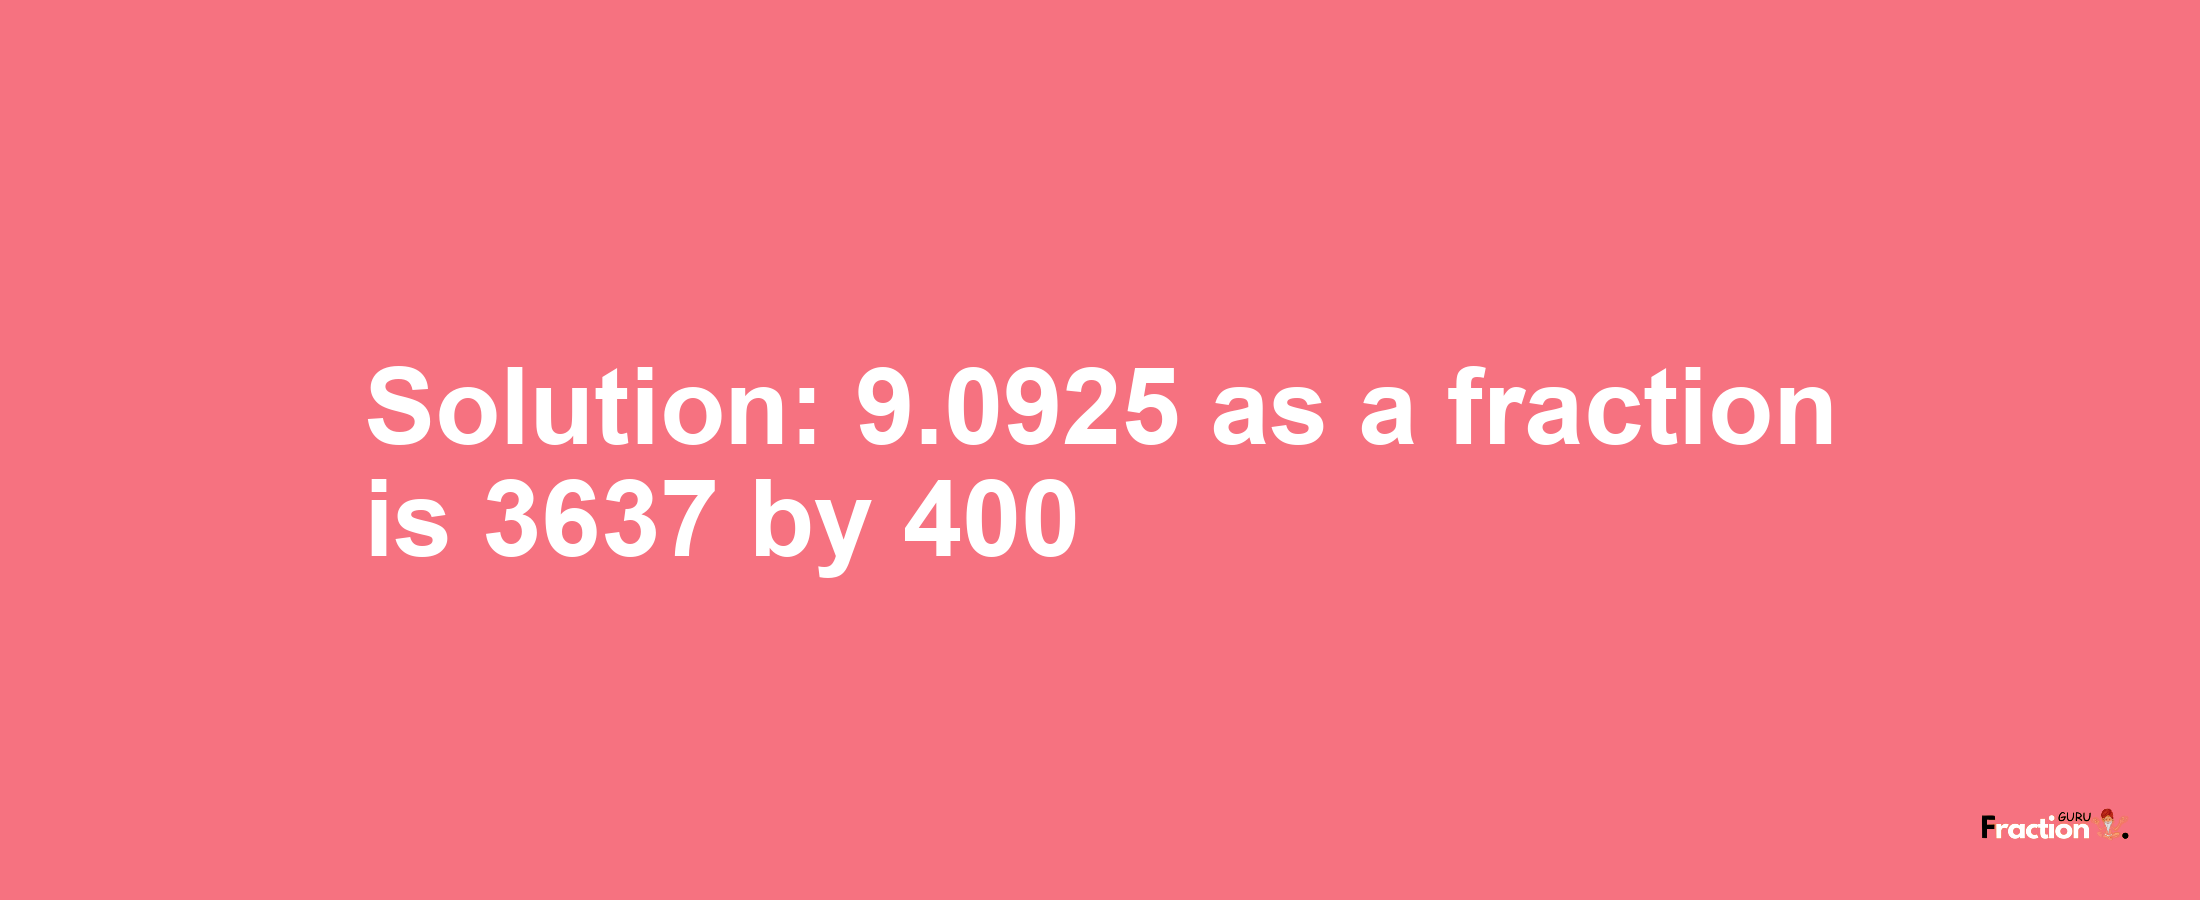 Solution:9.0925 as a fraction is 3637/400